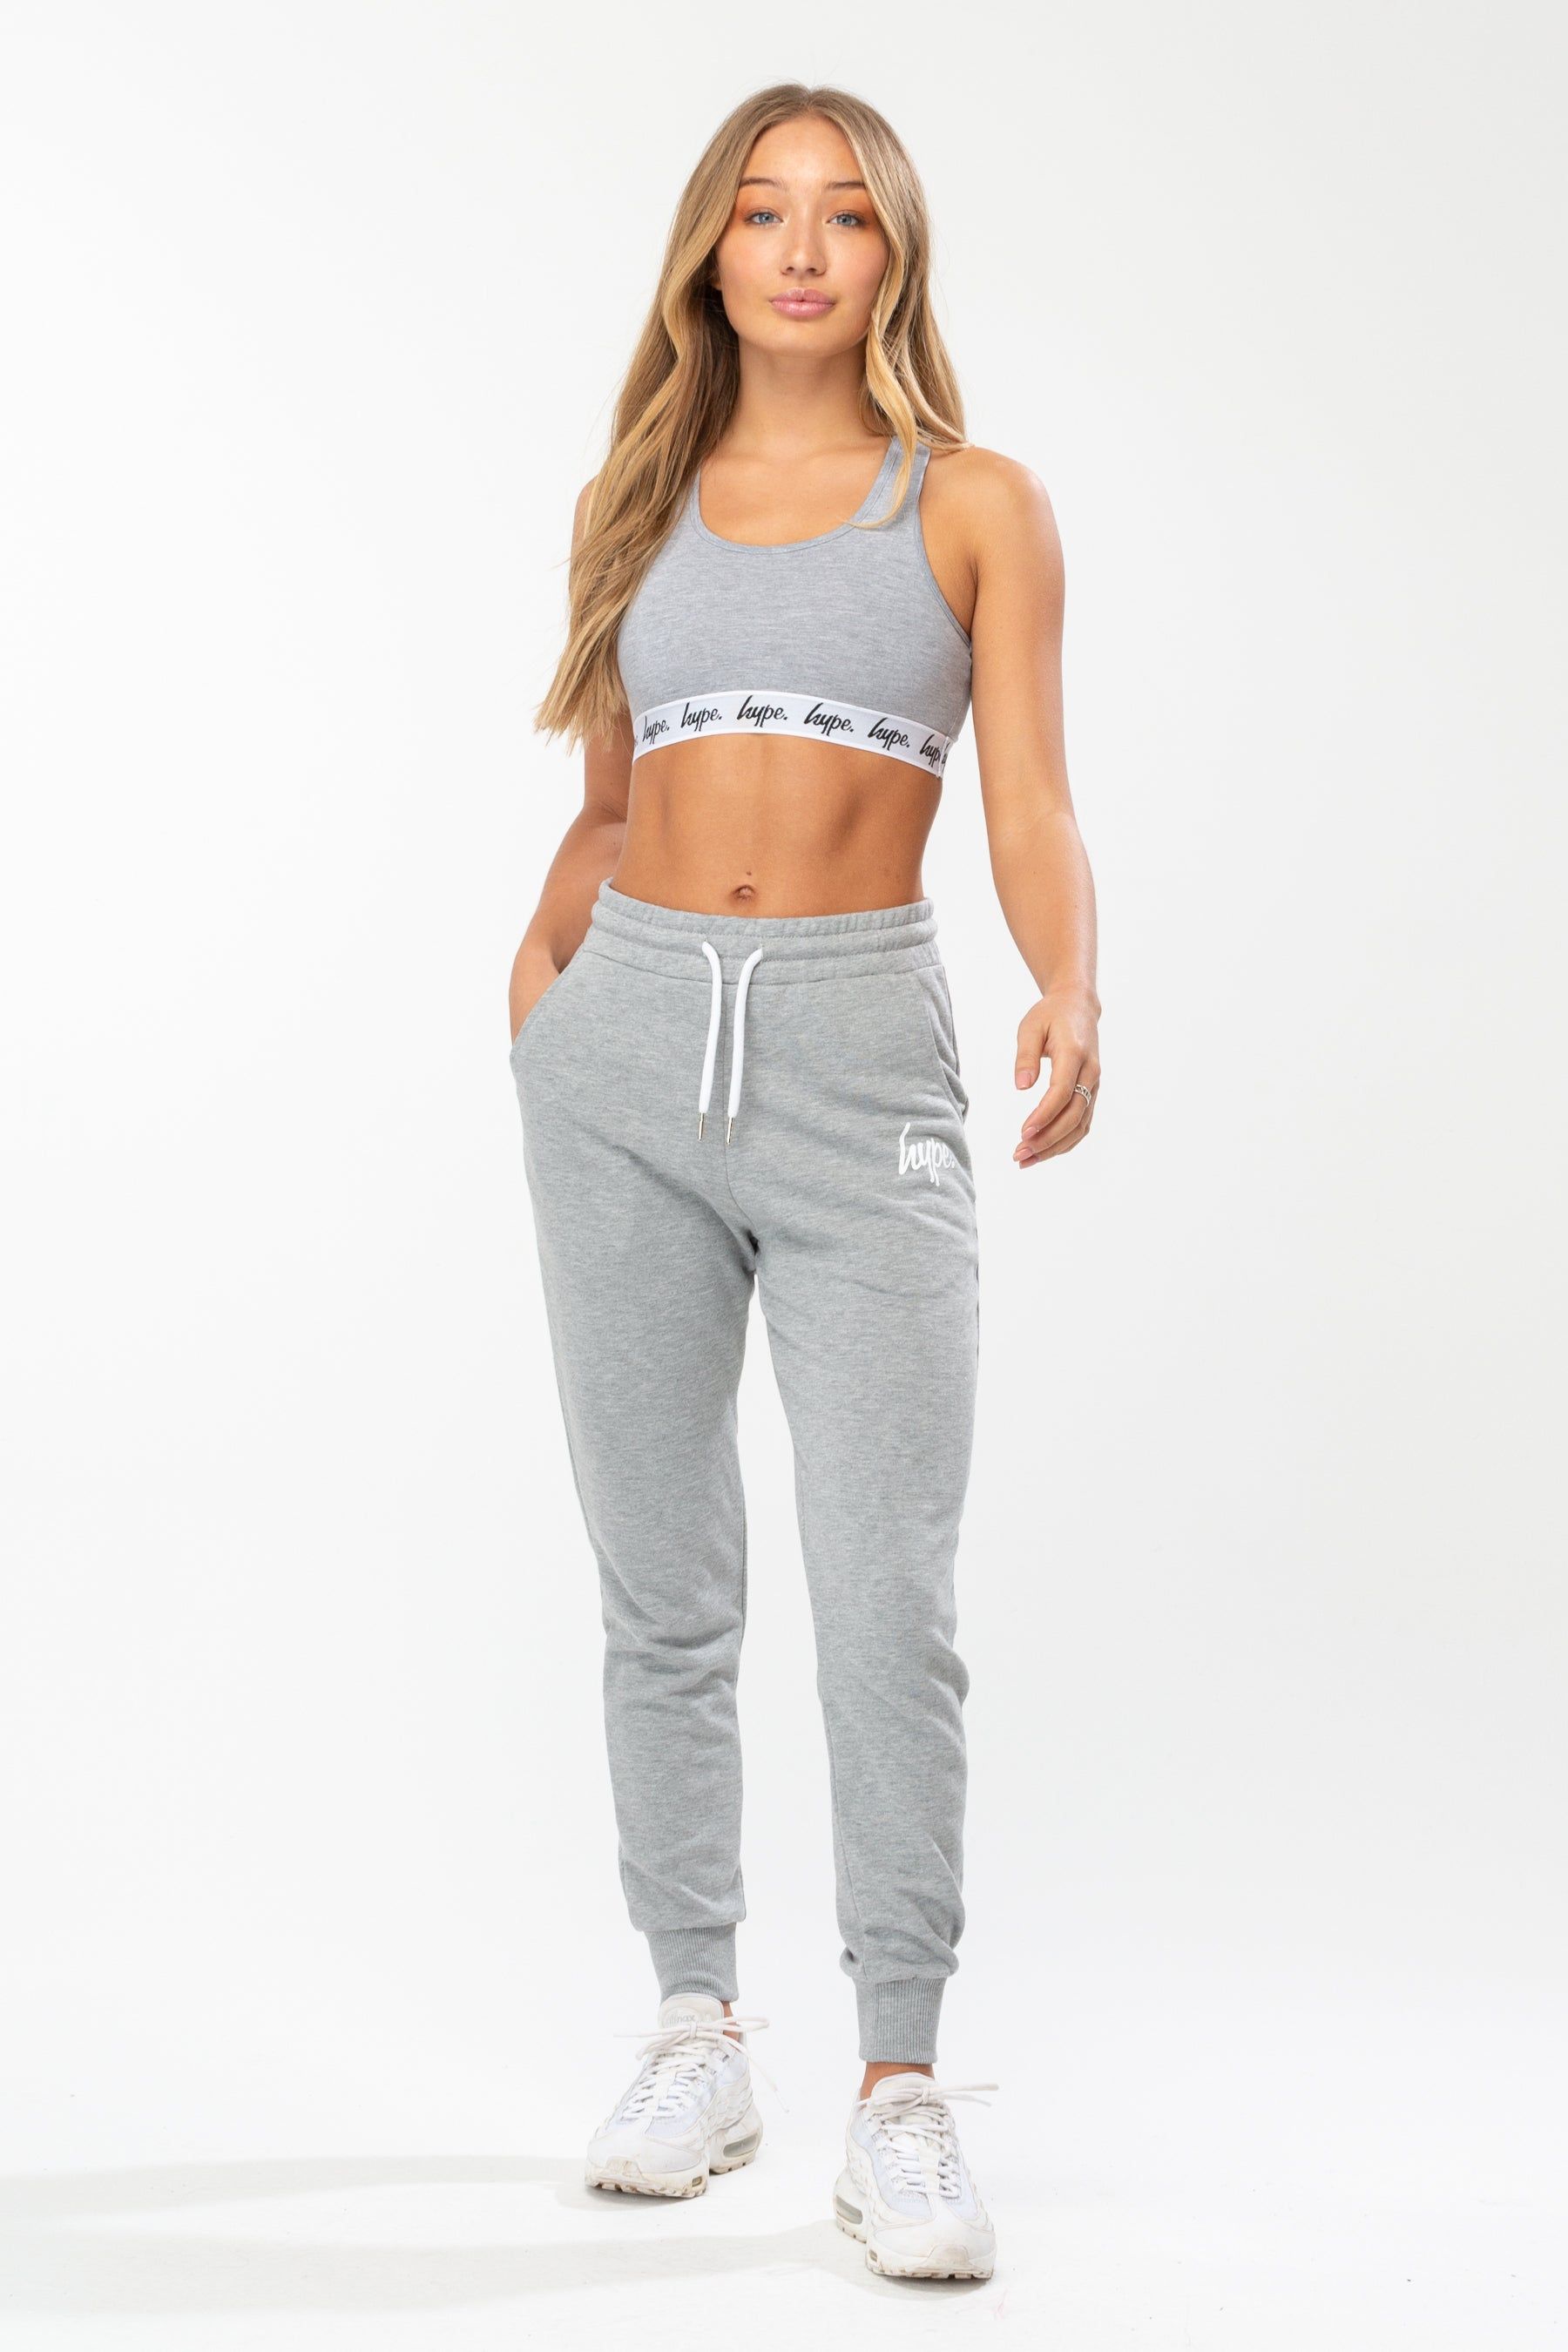 Joggers versatile for every occasion. The HYPE. Women's Joggers are designed with the ultimate amount of comfort, room and breathable space you need. In our standard women's jogger shape, with an elasticated waistband, fitted cuffs and drawstring pullers. Check out the matching women's hoodies and t-shirts in the scribble range, perfect to mix 'n' match your day to night looks. The model wears a size 8. Machine wash at 30 degrees.